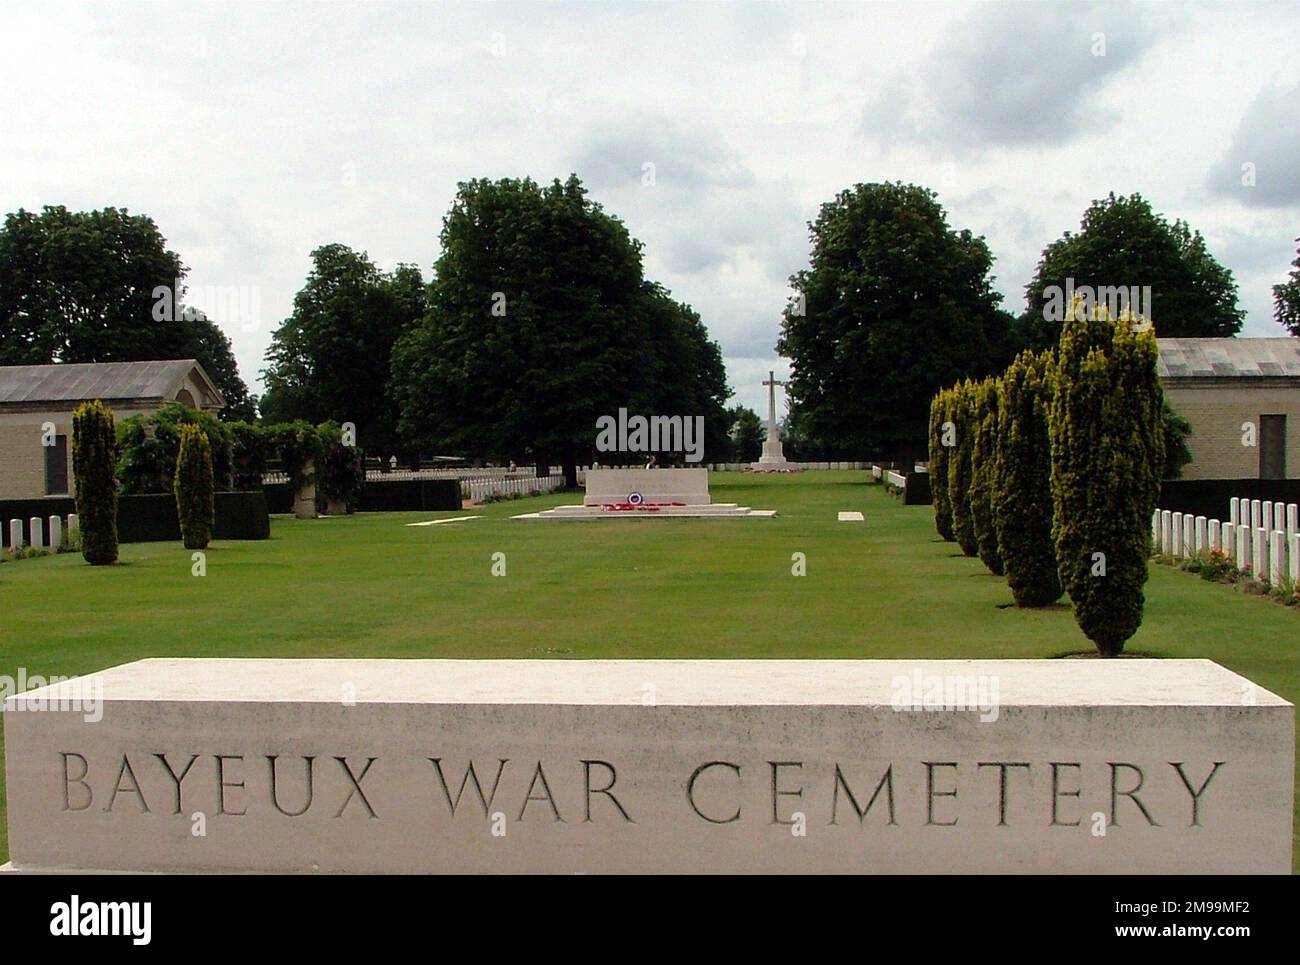 This Commonwealth War Graves Cemetery is the largest British WW2 Cemetery in France. It contains 4,648 graves - 3,935 from the UK, 181 from Canada, 17 from Australia, 8 from New Zealand,1 from South Africa, 25 from Poland, 3 from France, 2 from Czechoslovakia, 2 from Italy, 7 from Russia, 466 from Germany and one unidentified. Stock Photo